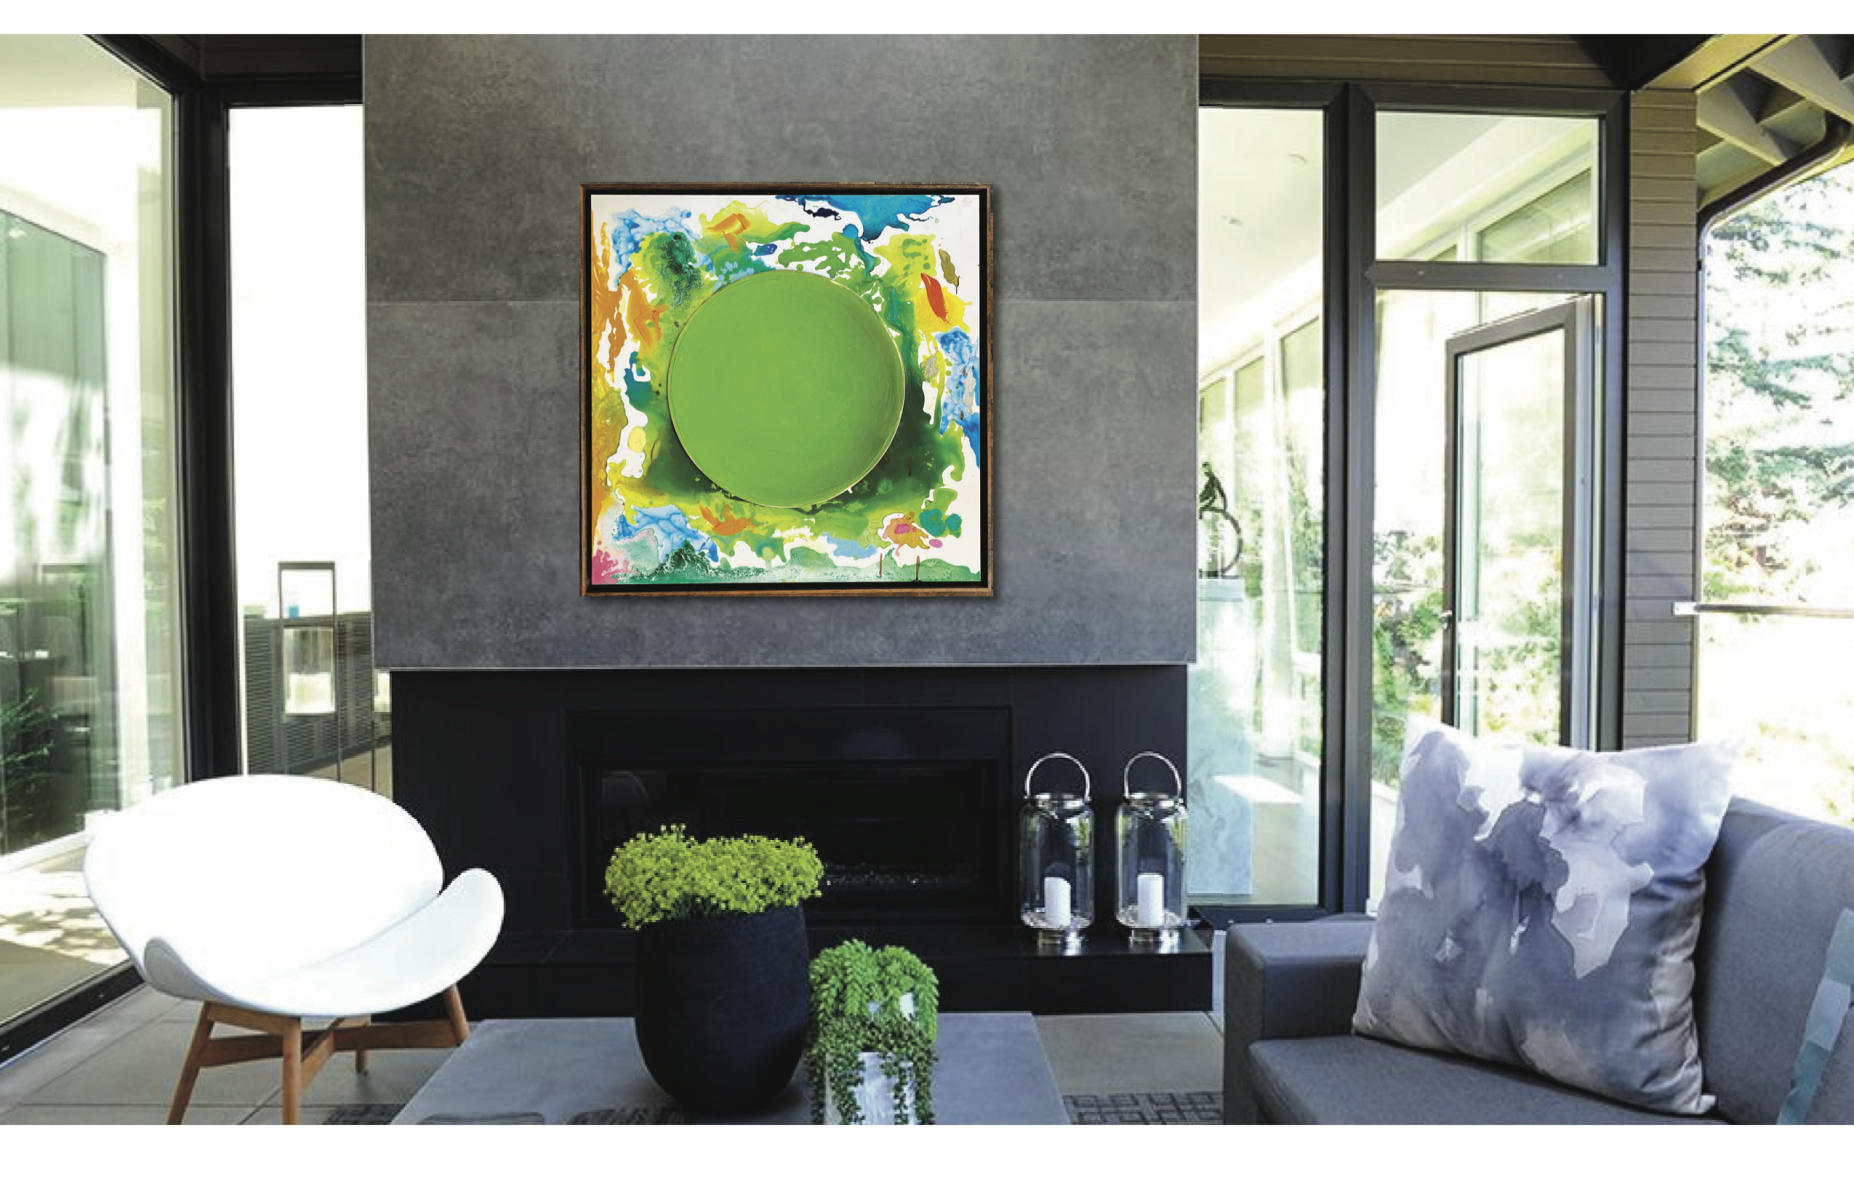 "Light Green Host" | Approximate scale view with artist's frame